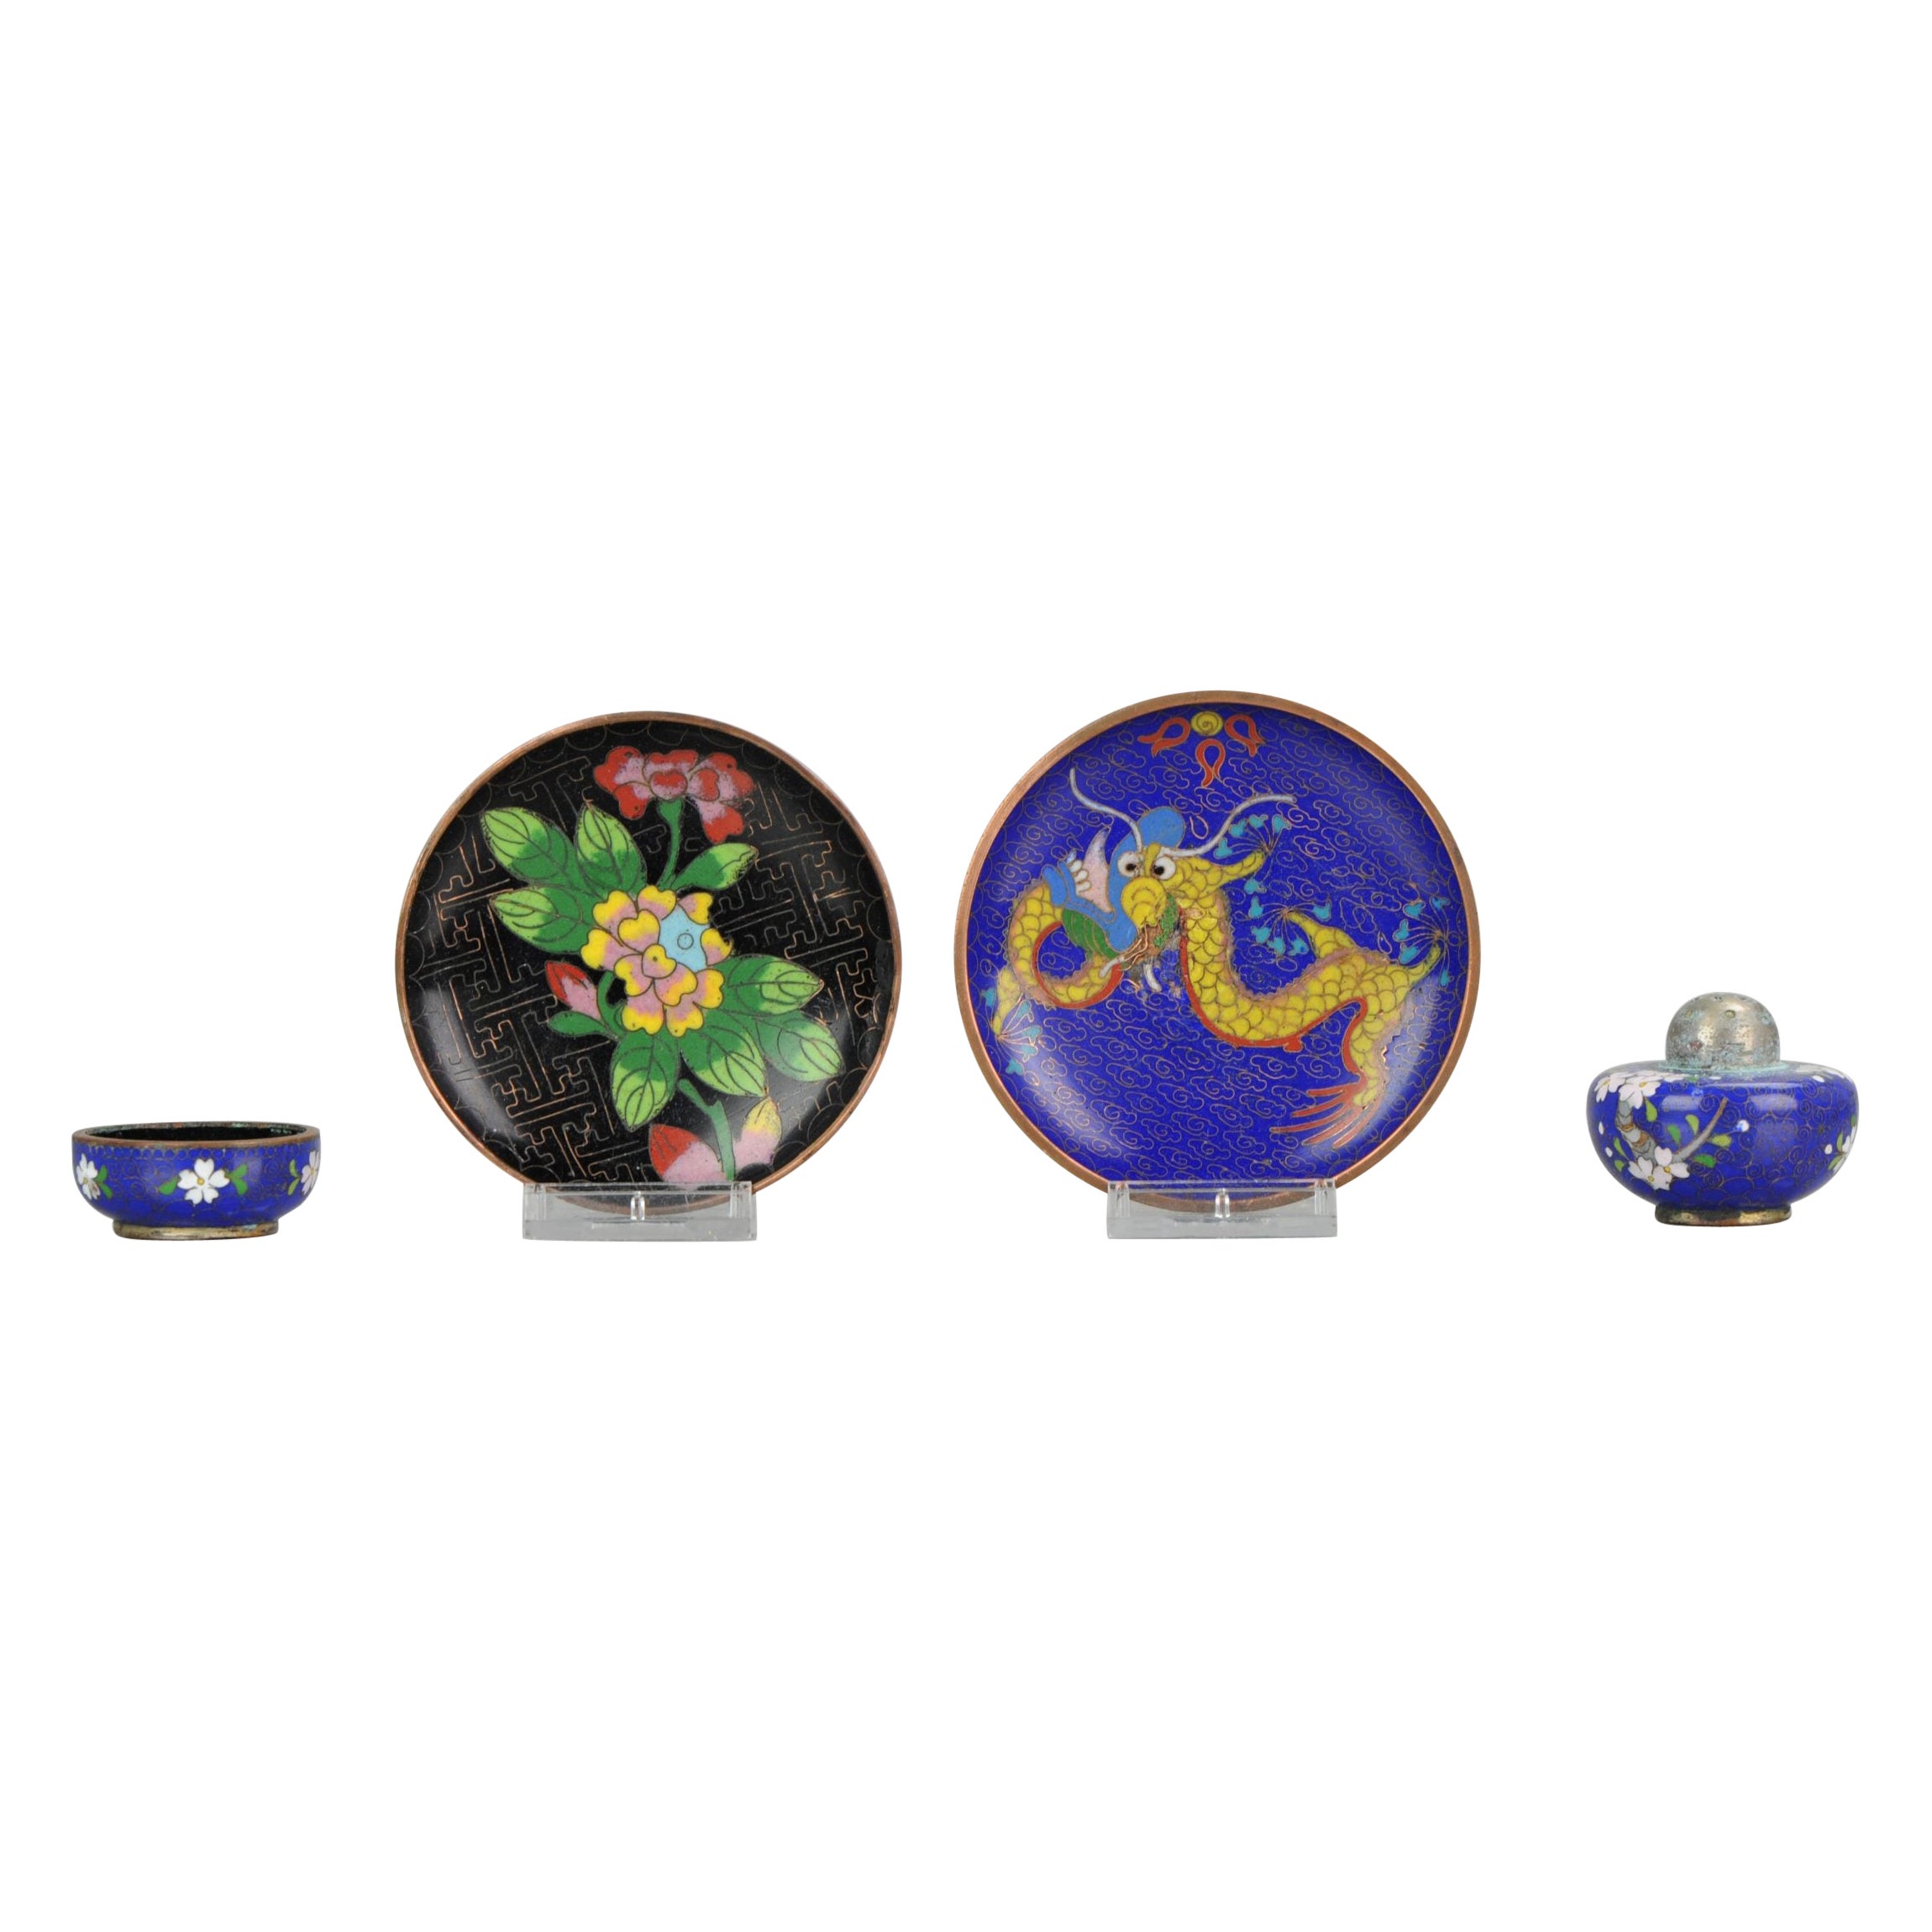 Lot Cloisonne Chinese Colorfull Vase CLoisonne Enamel China, Early 20th Cen   For Sale